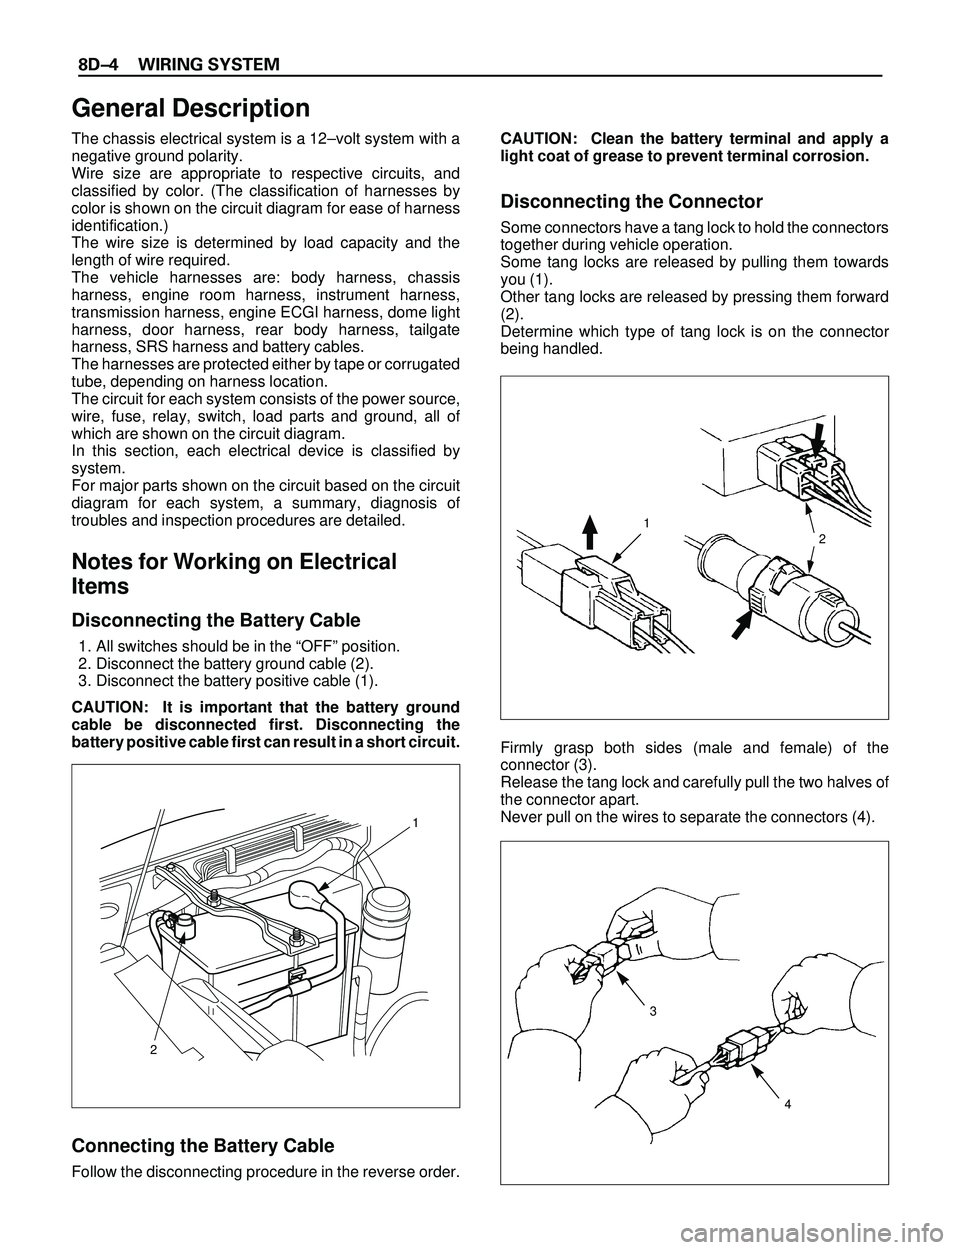 ISUZU TROOPER 1998  Service Repair Manual 8DÐ4 WIRING SYSTEM
The chassis electrical system is a 12Ðvolt system with a
negative ground polarity.
Wire size are appropriate to respective circuits, and
classified by color. (The classification o